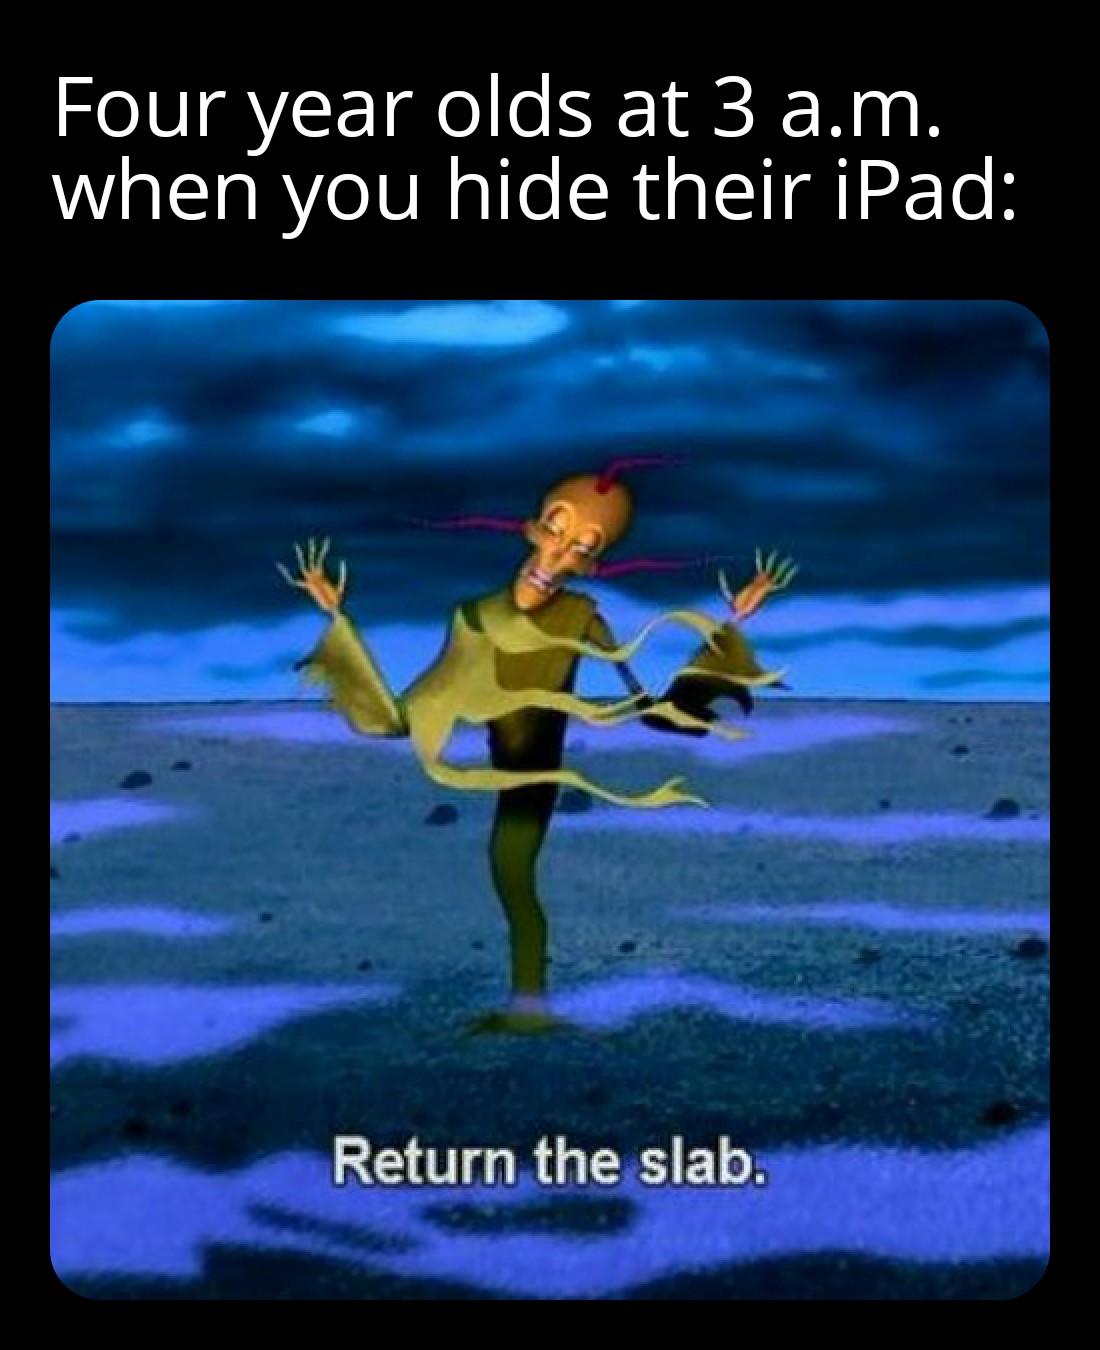 dank memes - funny memes - courage the cowardly dog return the slab - Four year olds at 3 a.m. when you hide their iPad Return the slab.